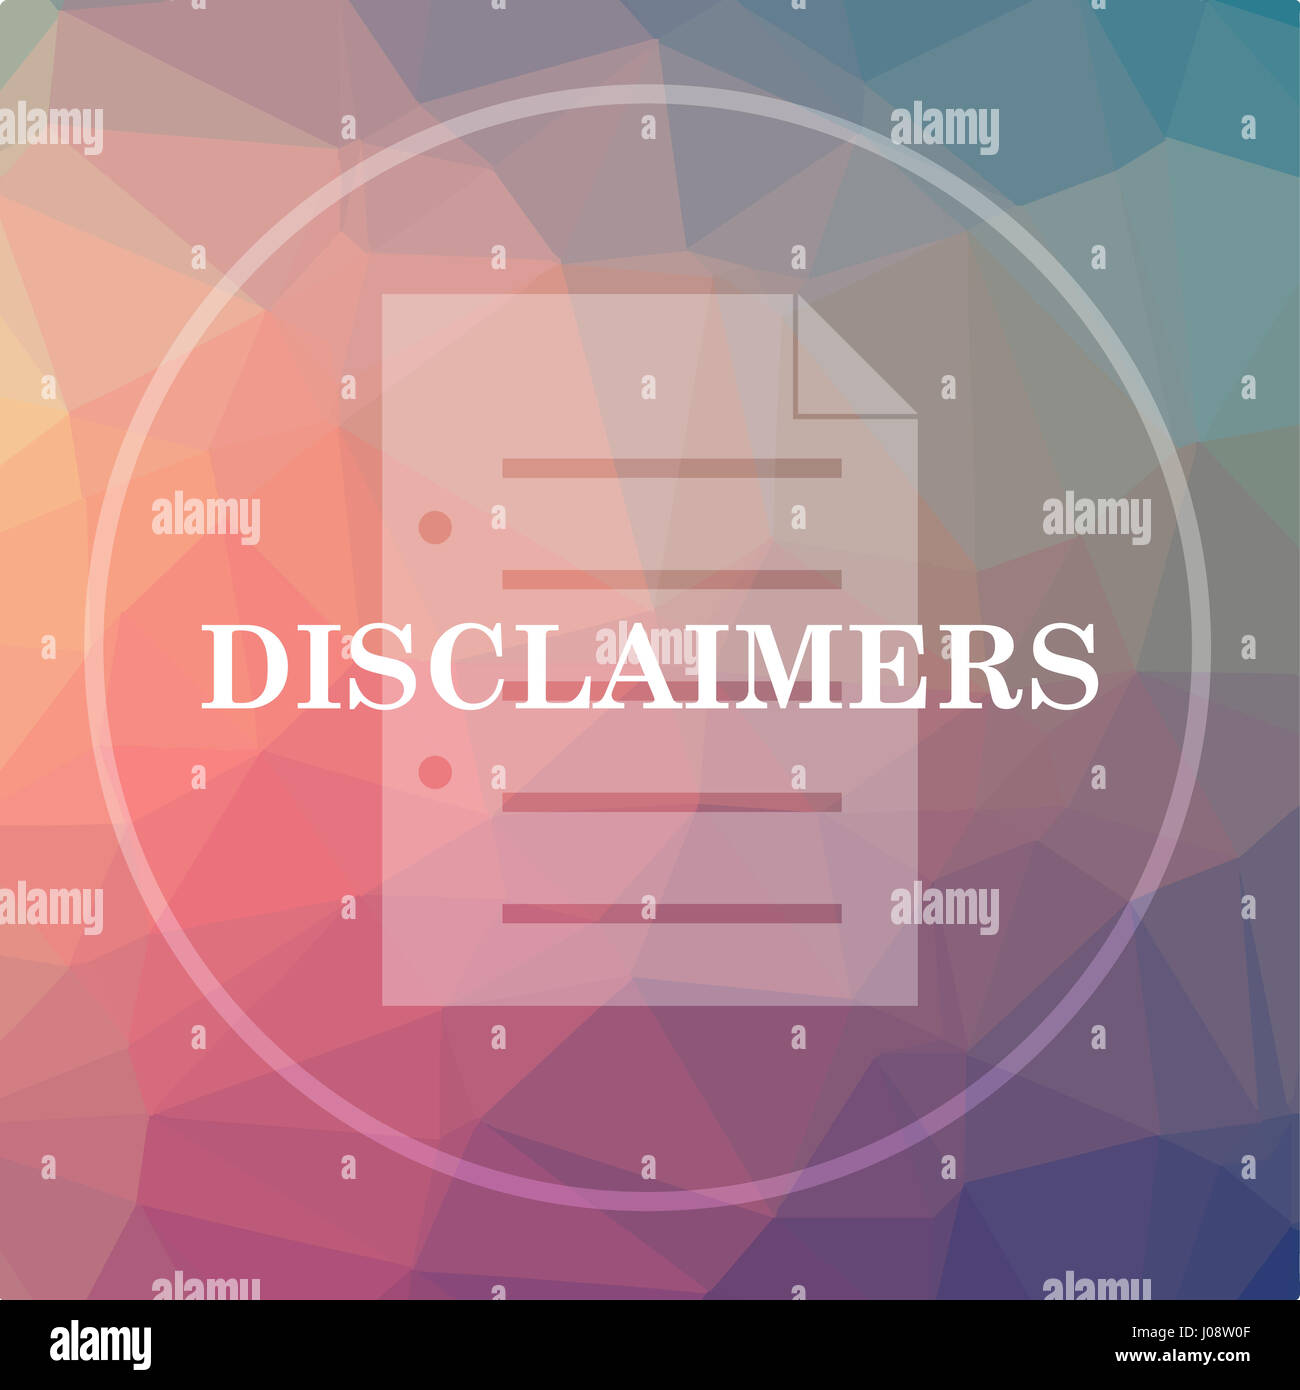 Disclaimers icon. Disclaimers website button on low poly background. Stock Photo